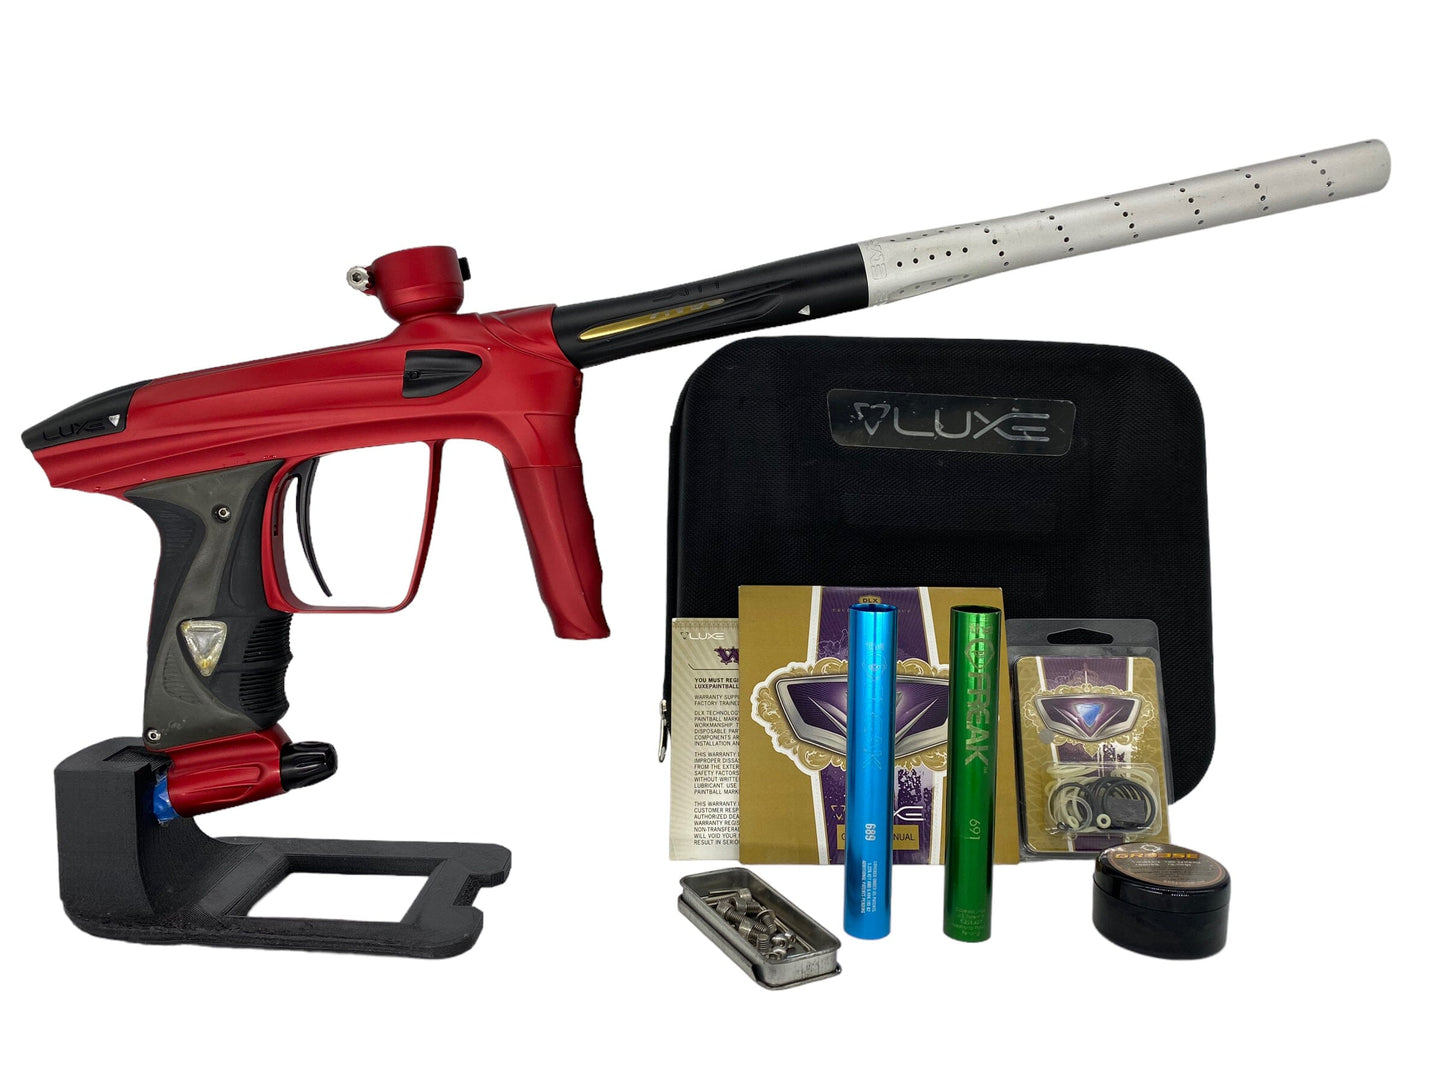 Used Dlx Luxe Oled Paintball Gun from CPXBrosPaintball Buy/Sell/Trade Paintball Markers, Paintball Hoppers, Paintball Masks, and Hormesis Headbands